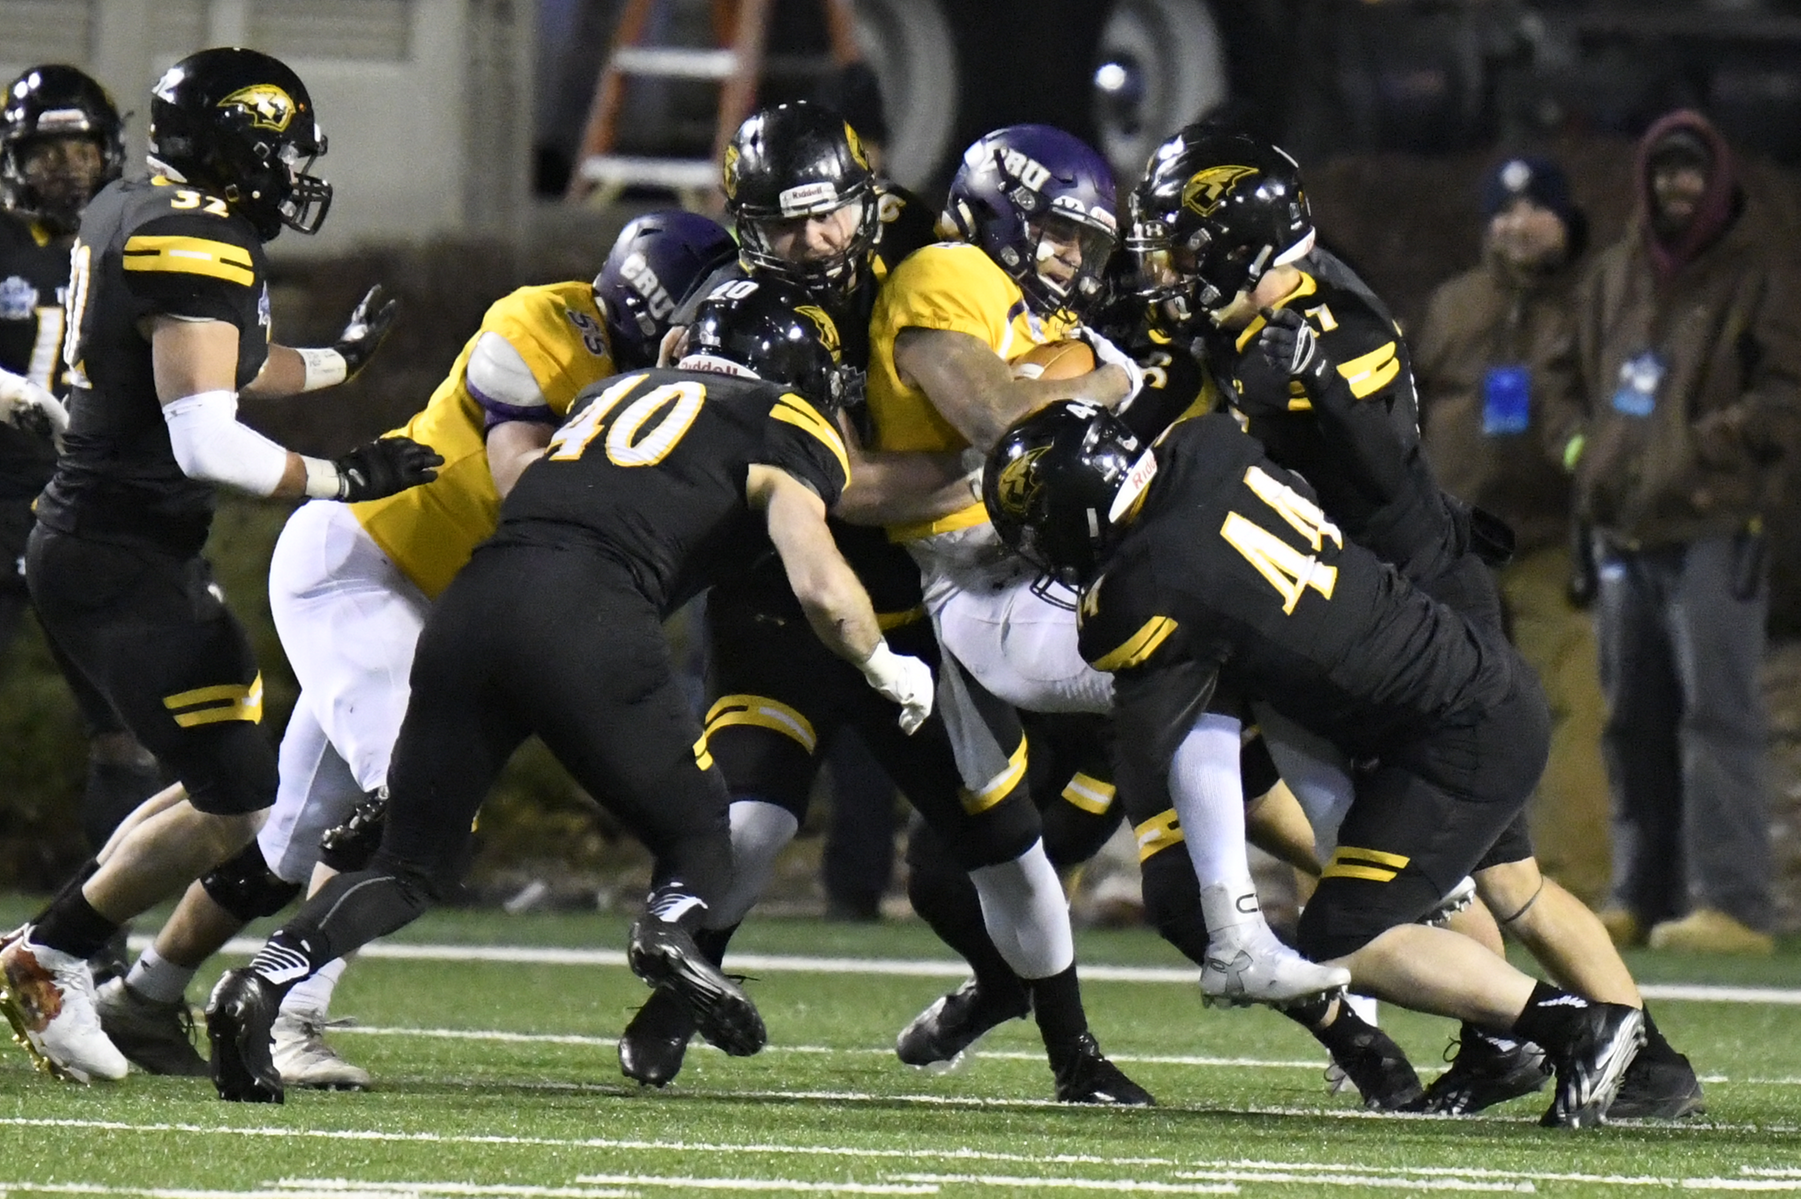 A group of Titans, including Branden Lloyd (44), AJ Plewa (7) and Jake Thein (40), stop a run by University of Mary Hardin-Baylor quarterback Blake Jackson.